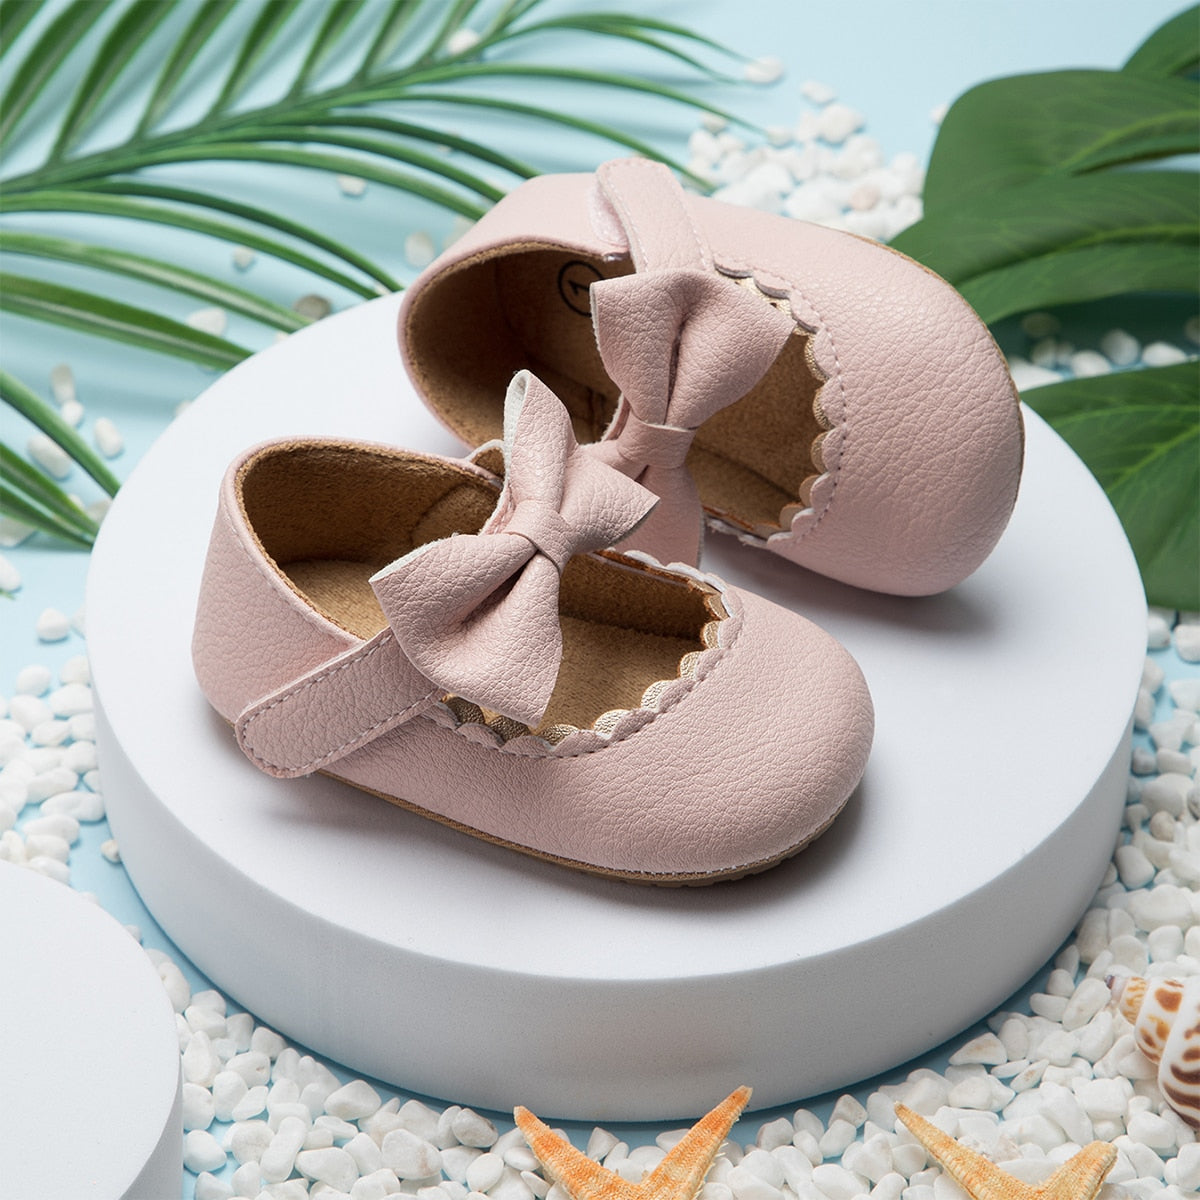 Baby, Toddler  Bowknot Non-slip Rubber Soft-Sole Flat PU Shoes